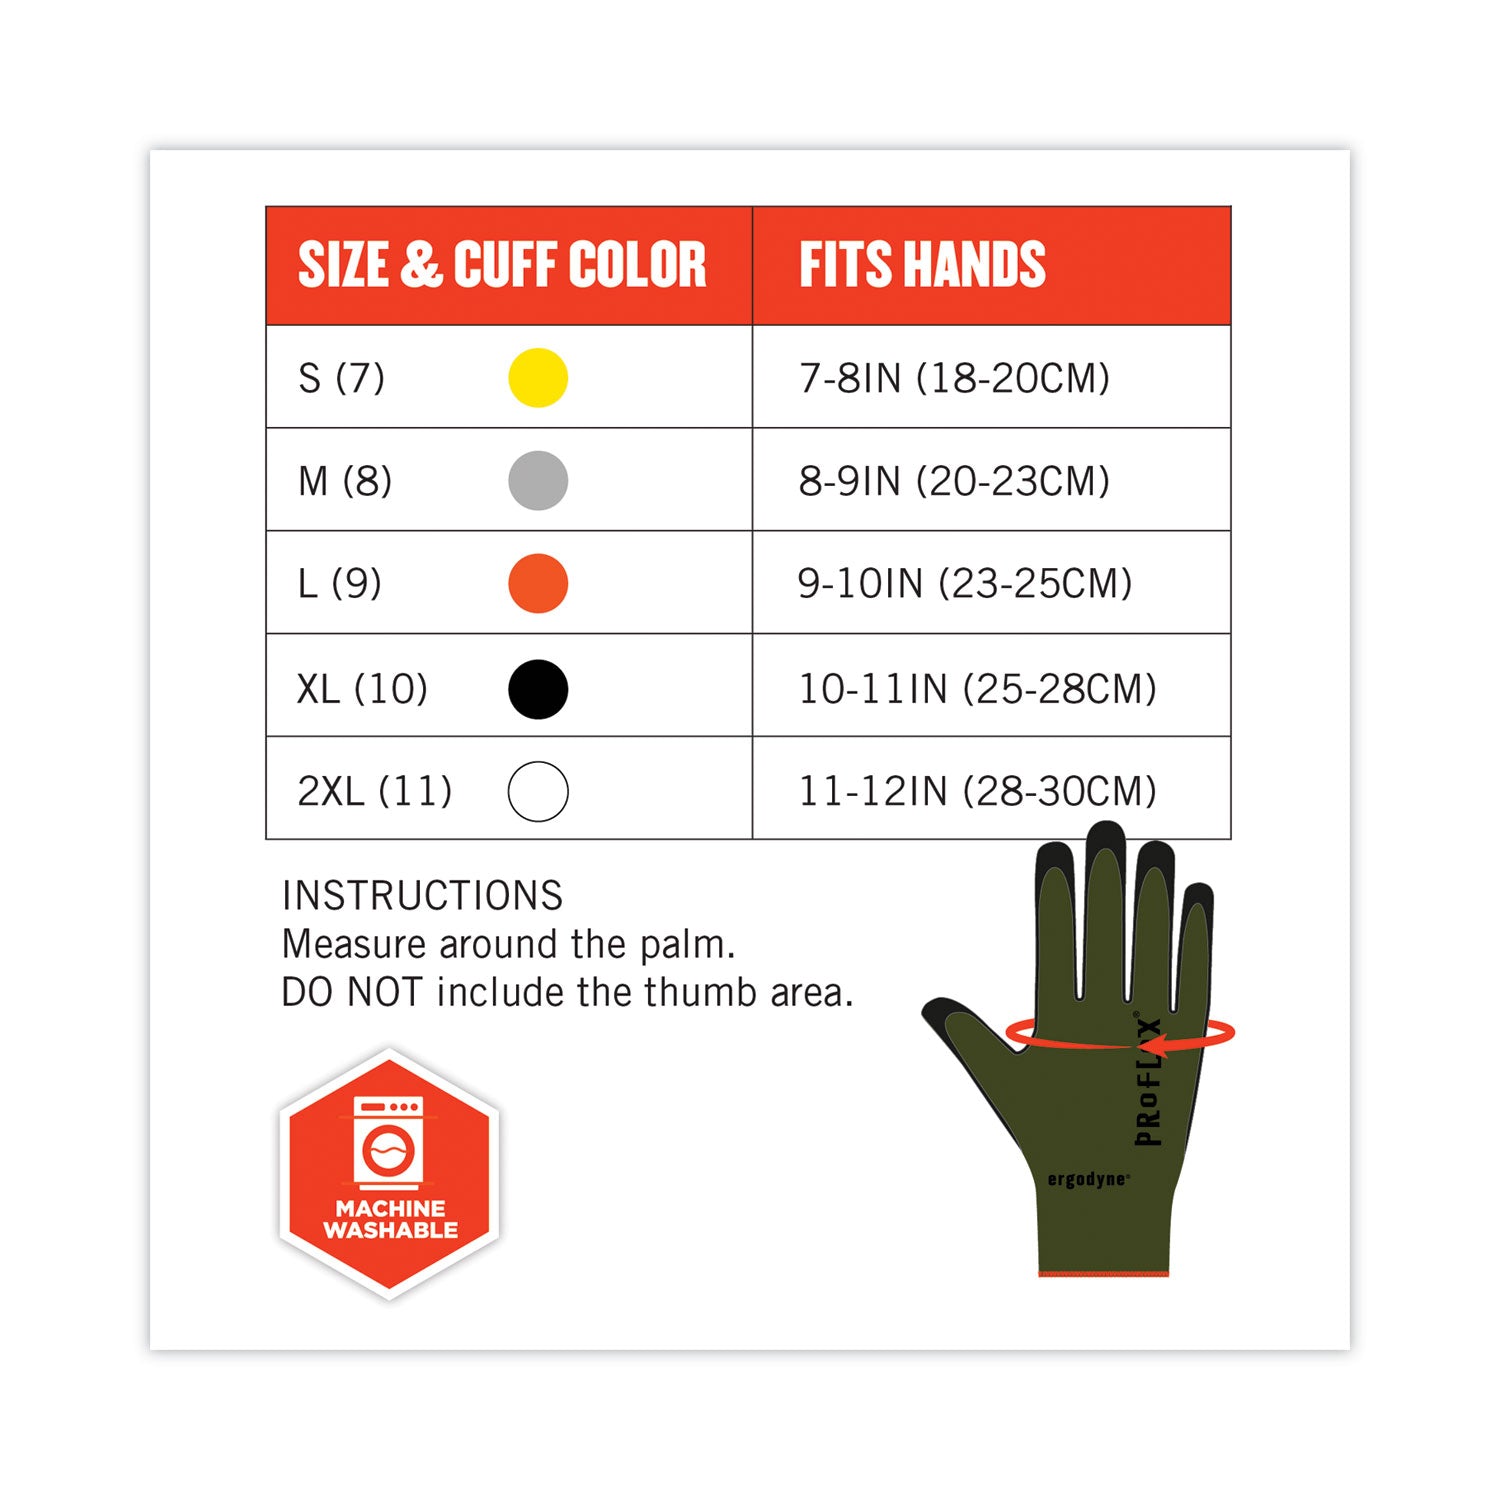 proflex-7042-ansi-a4-nitrile-coated-cr-gloves-green-x-large-pair-ships-in-1-3-business-days_ego10345 - 4